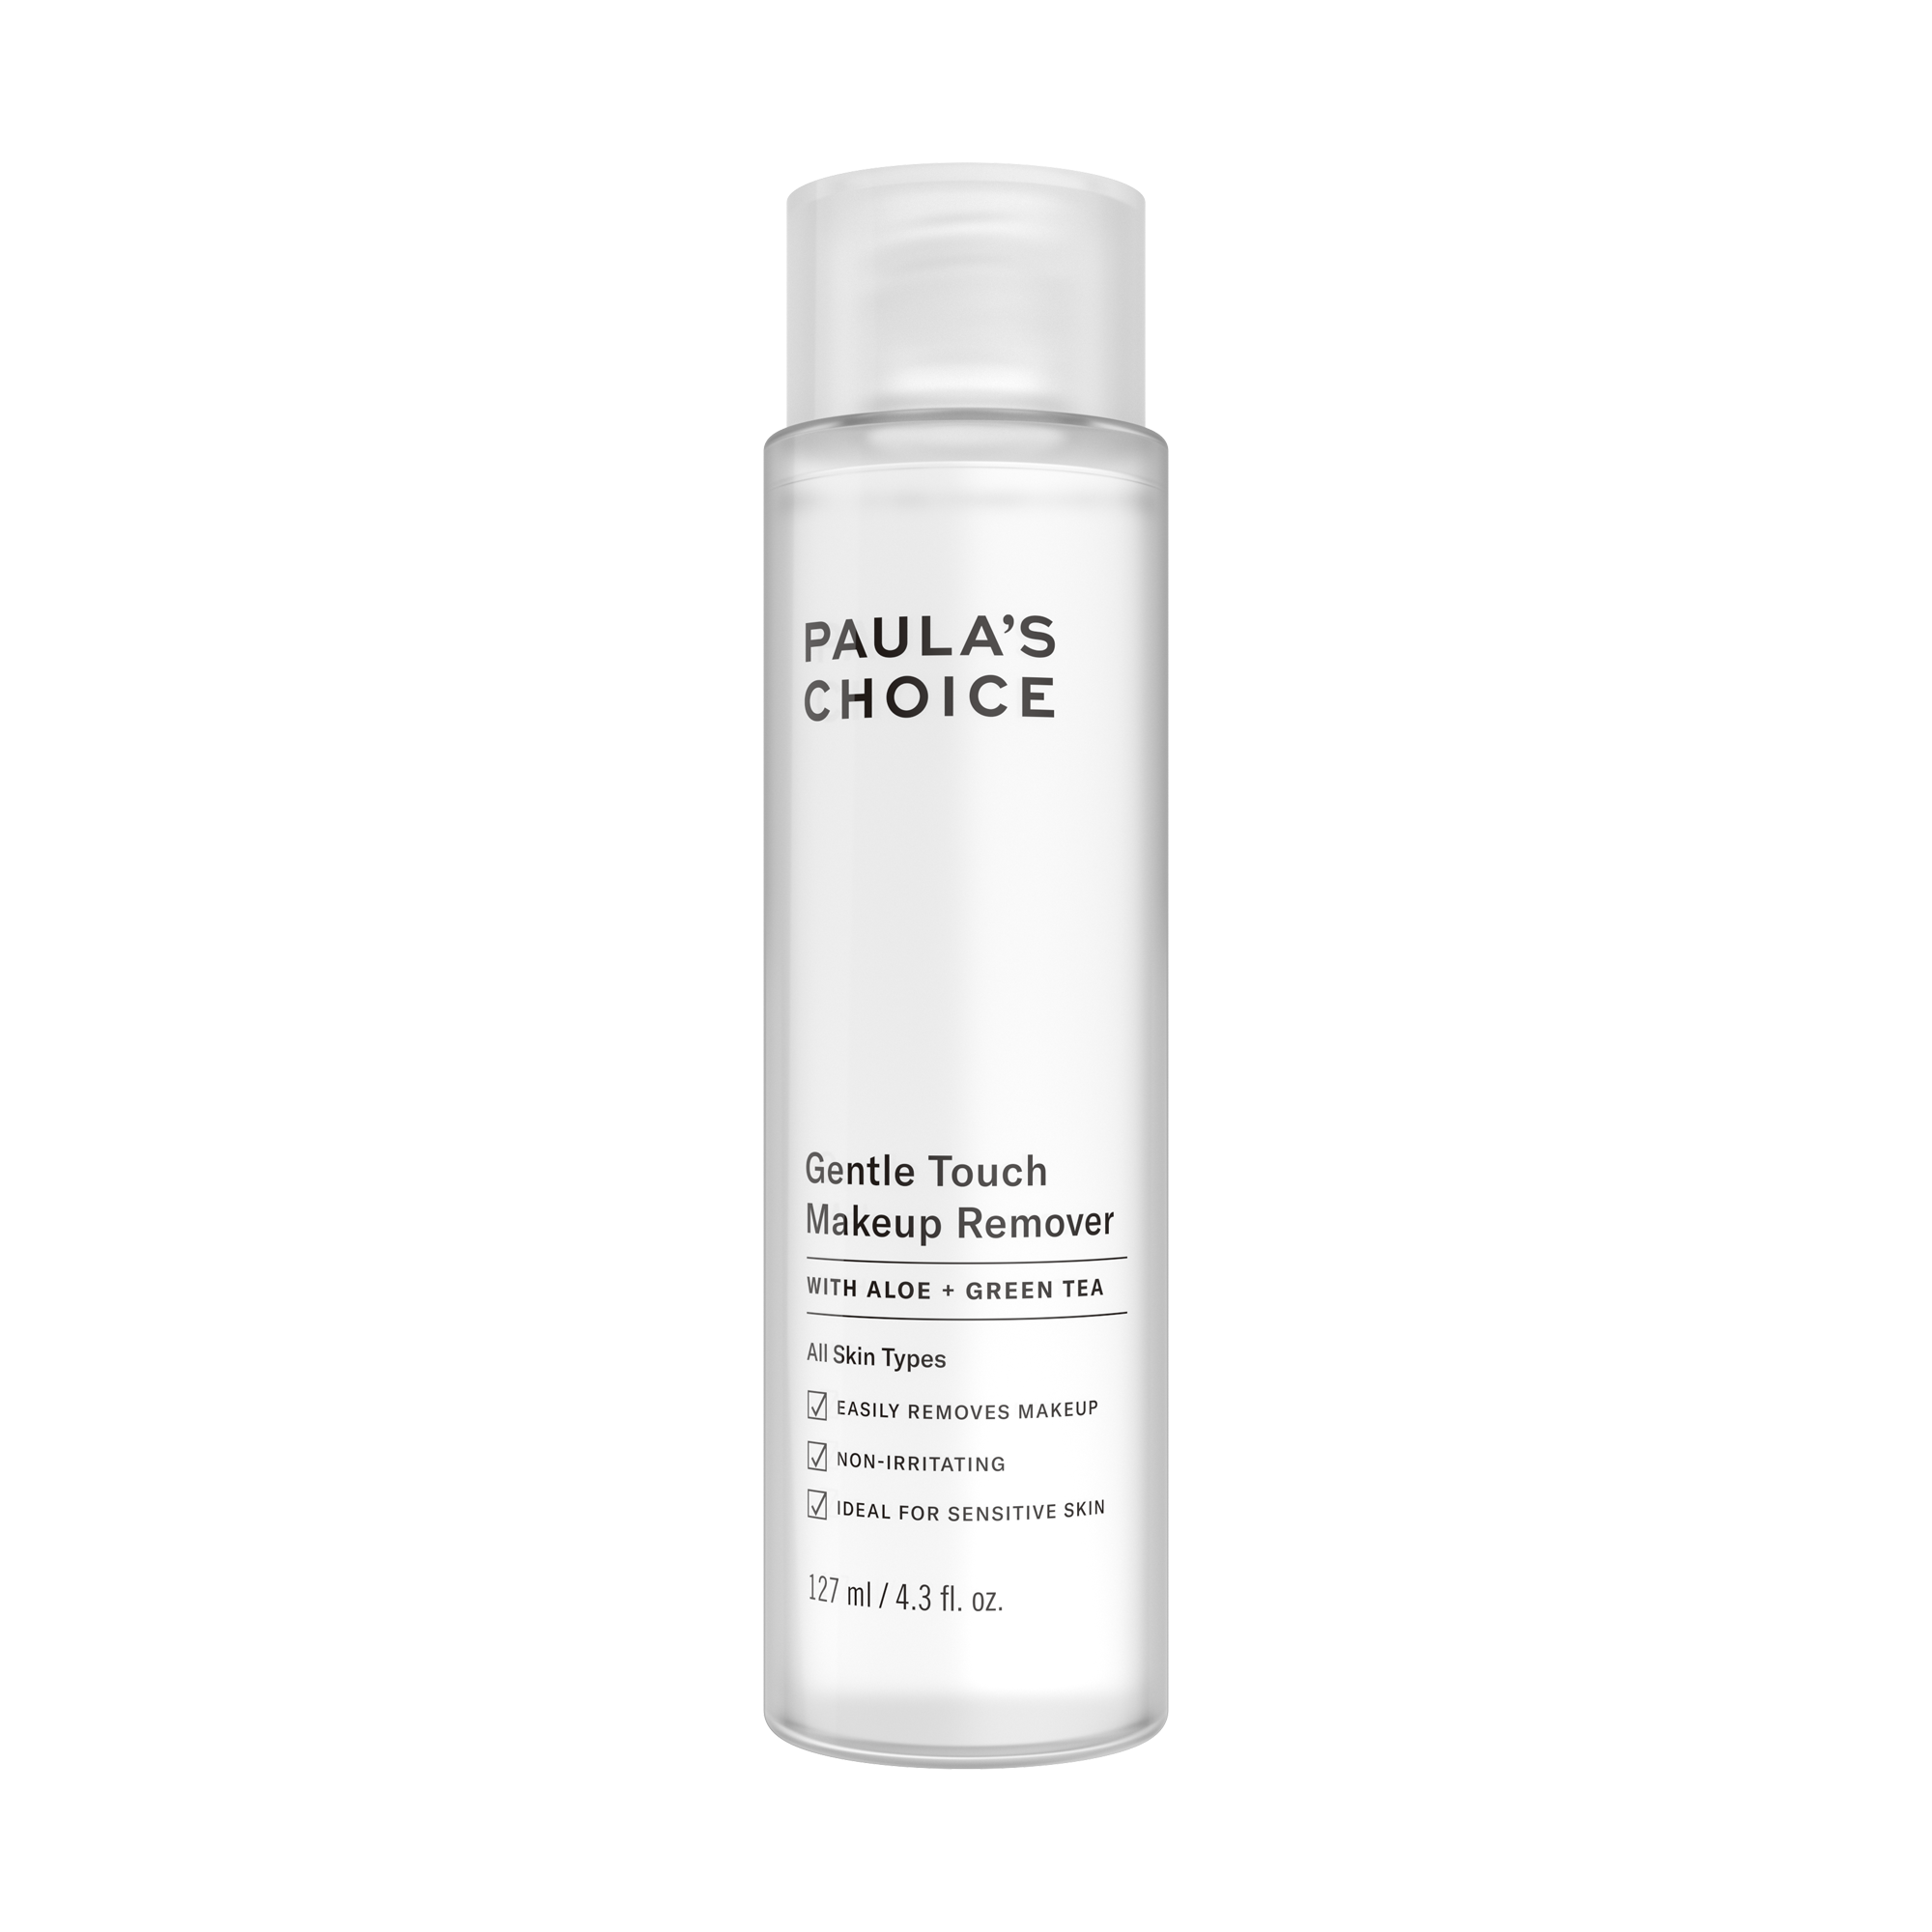 GENTLE TOUCH Makeup Remover | Paula's Choice